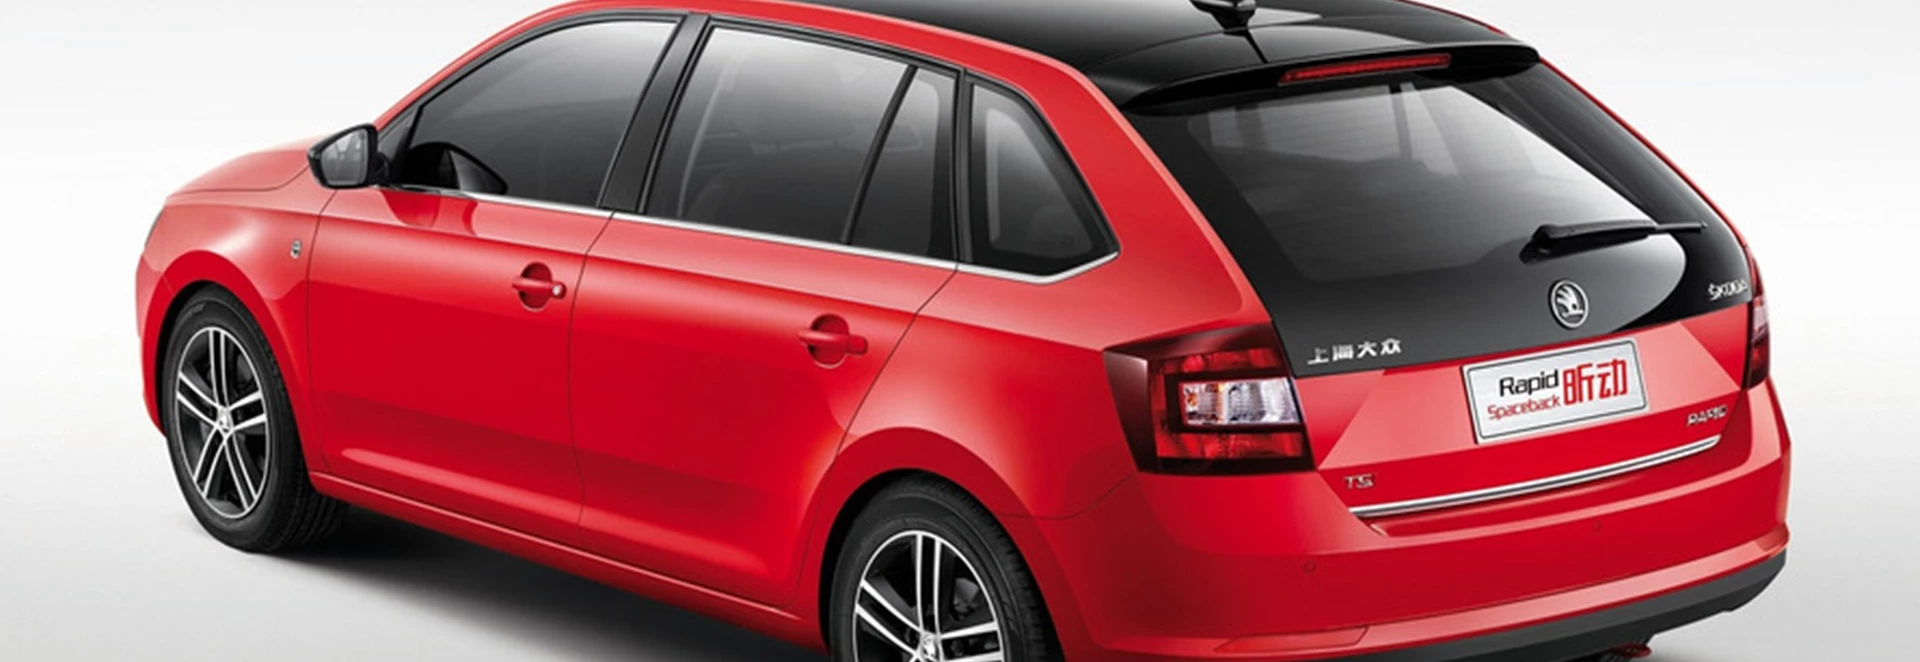 Skoda Rapid range gets a facelift and new turbo engine